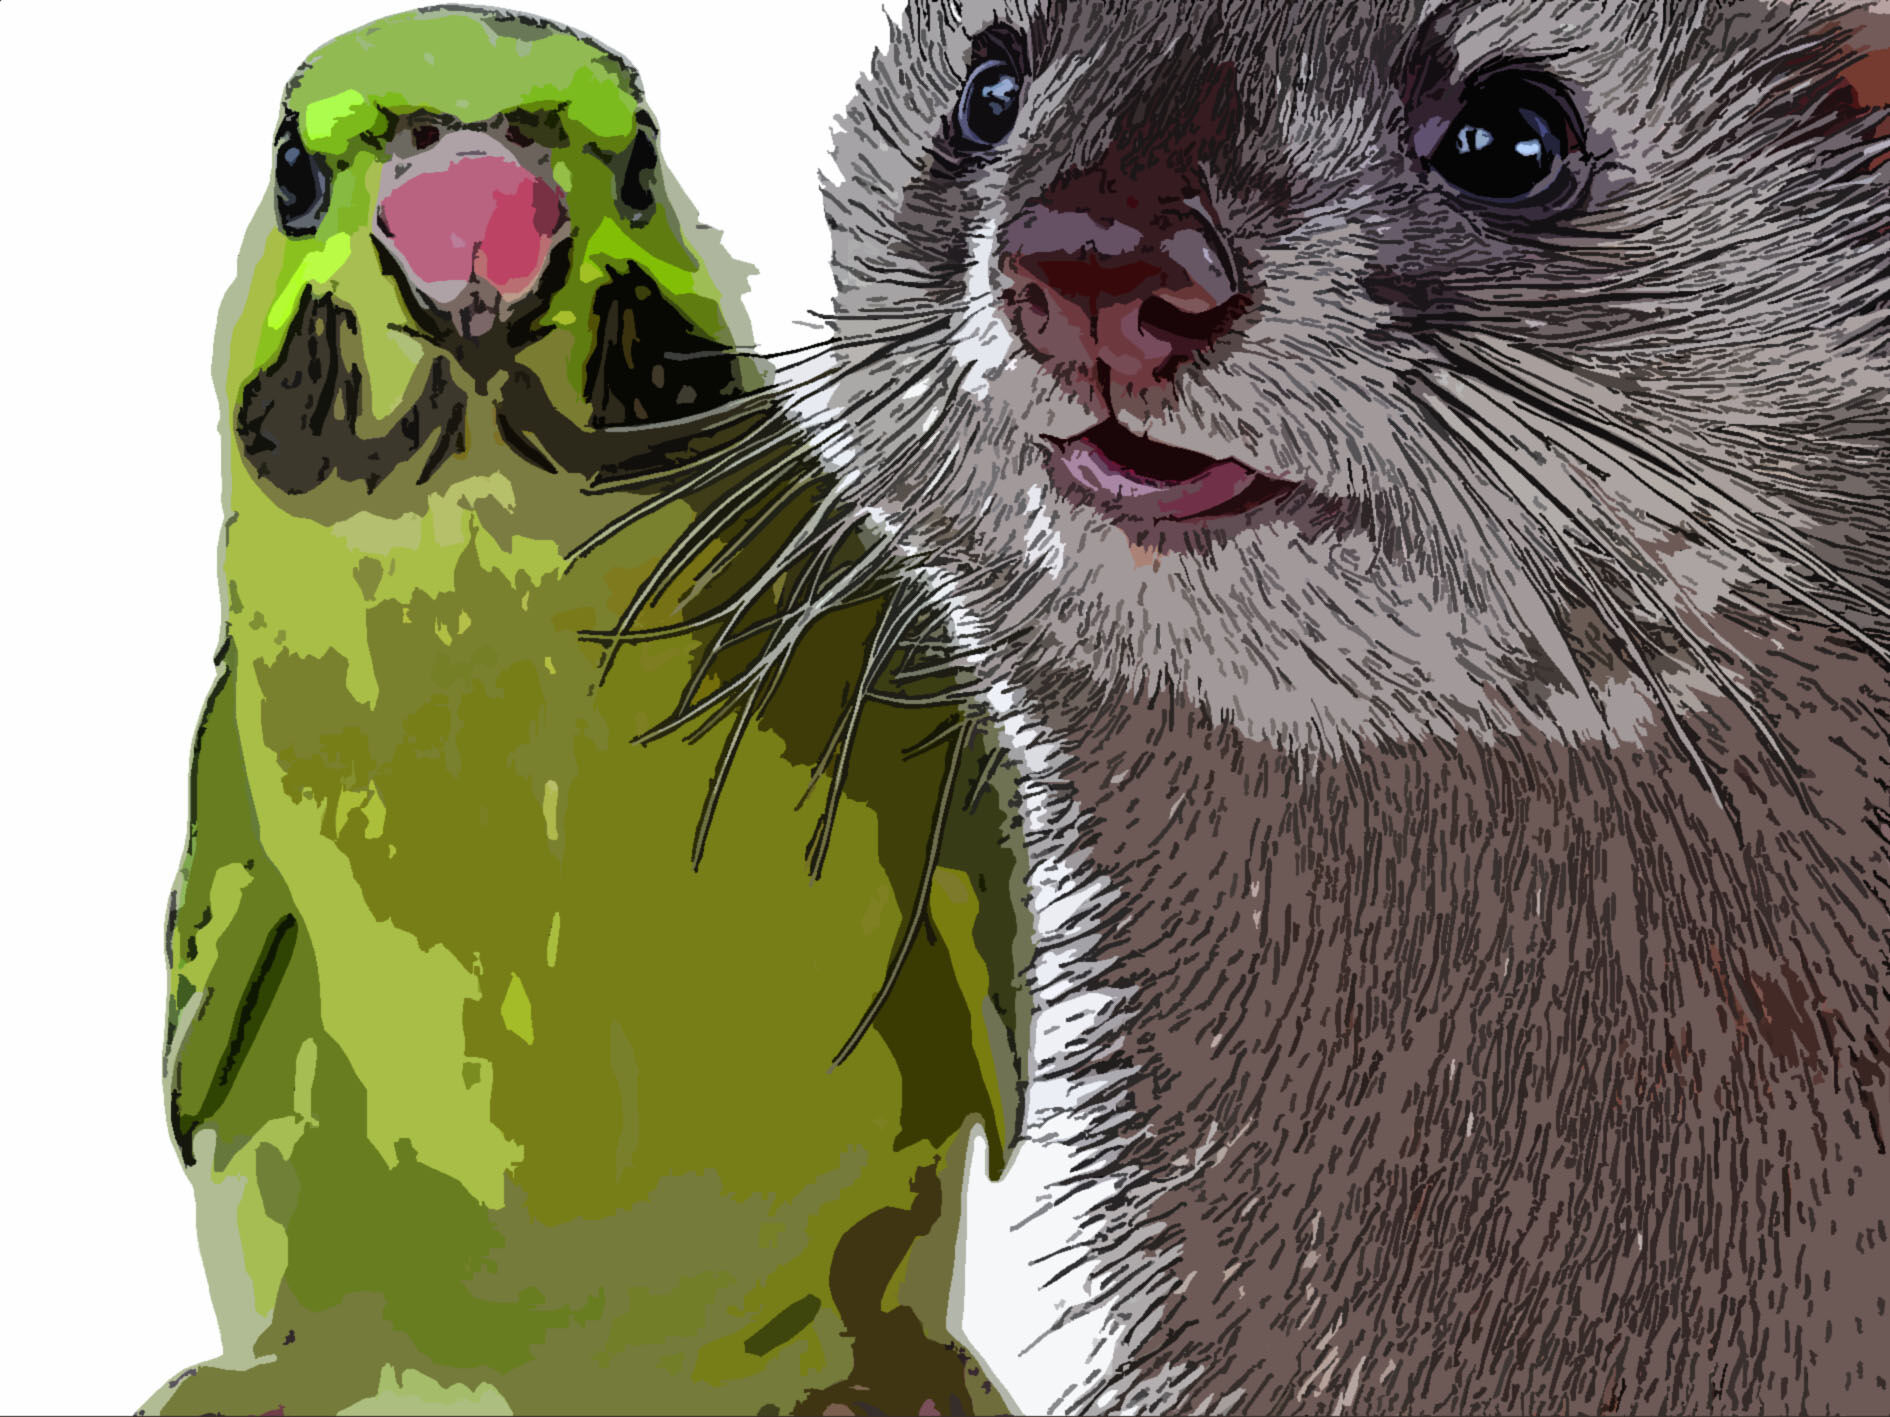 THE FERRET AND THE PARROT